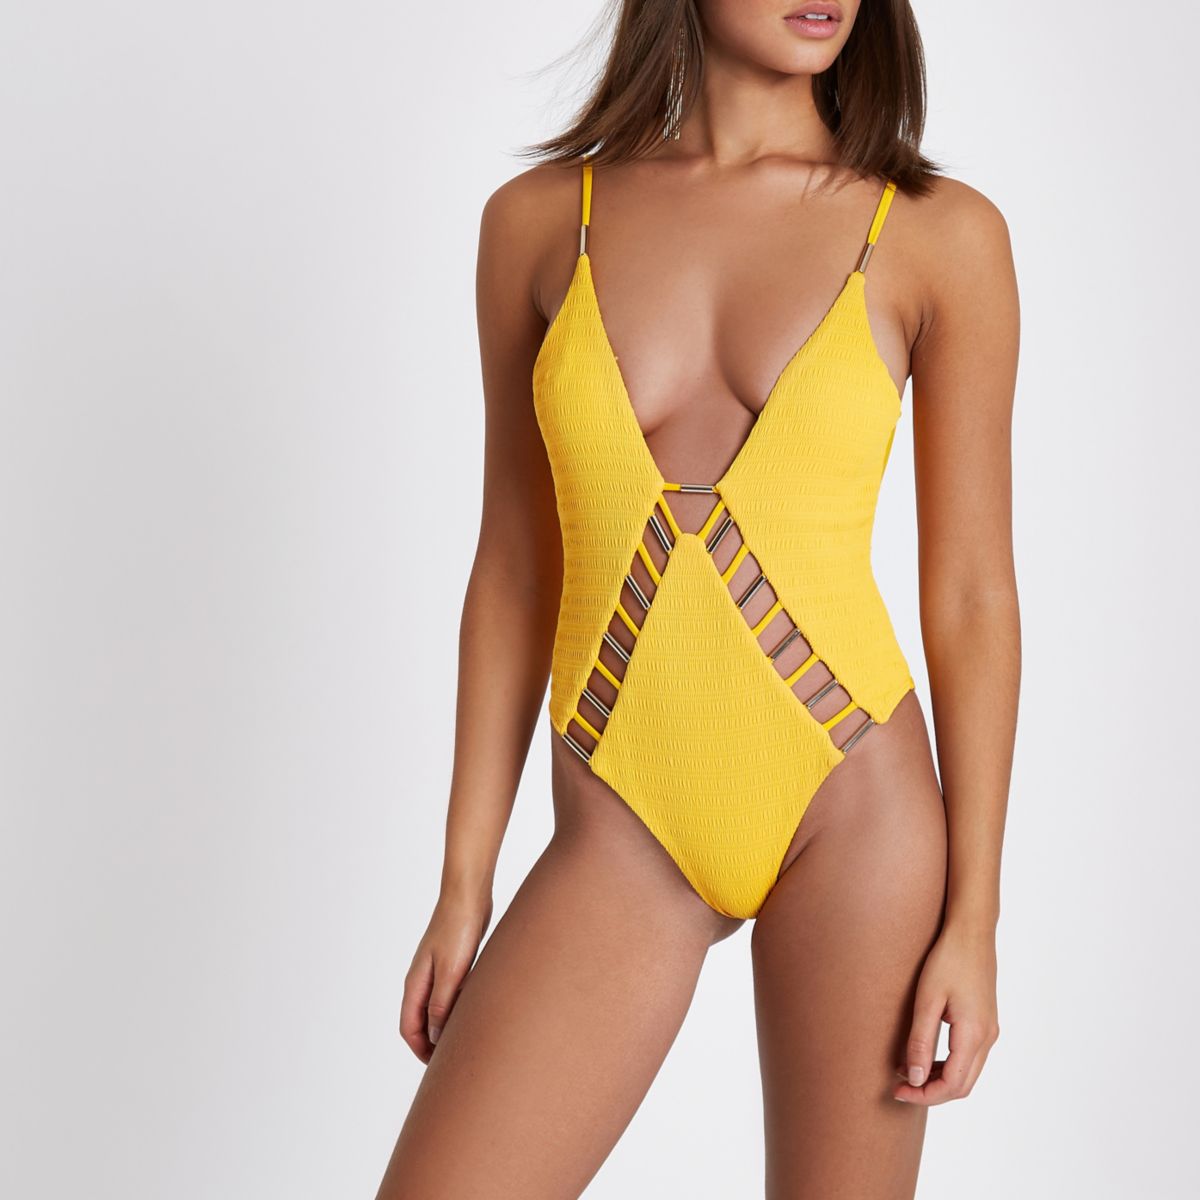 These summer swimsuits are great to have on hand all summer long!